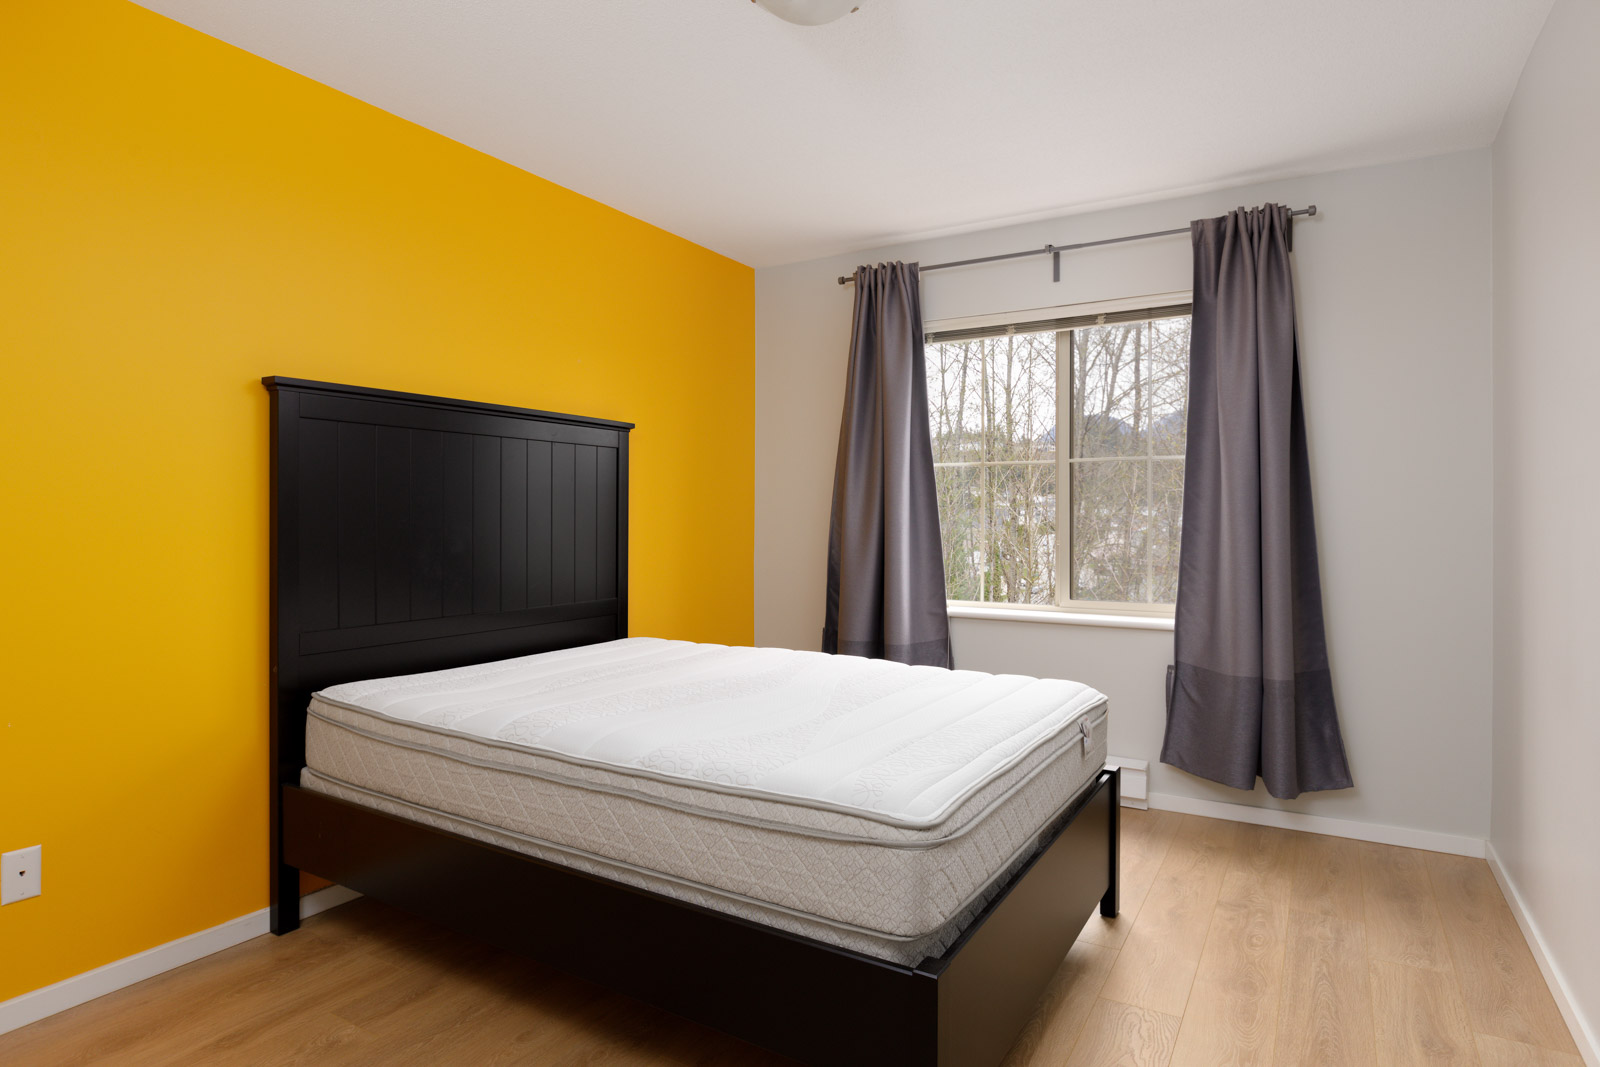 bedroom with a dark yellow accent wall. grey drapes for windows and bed in middle of room